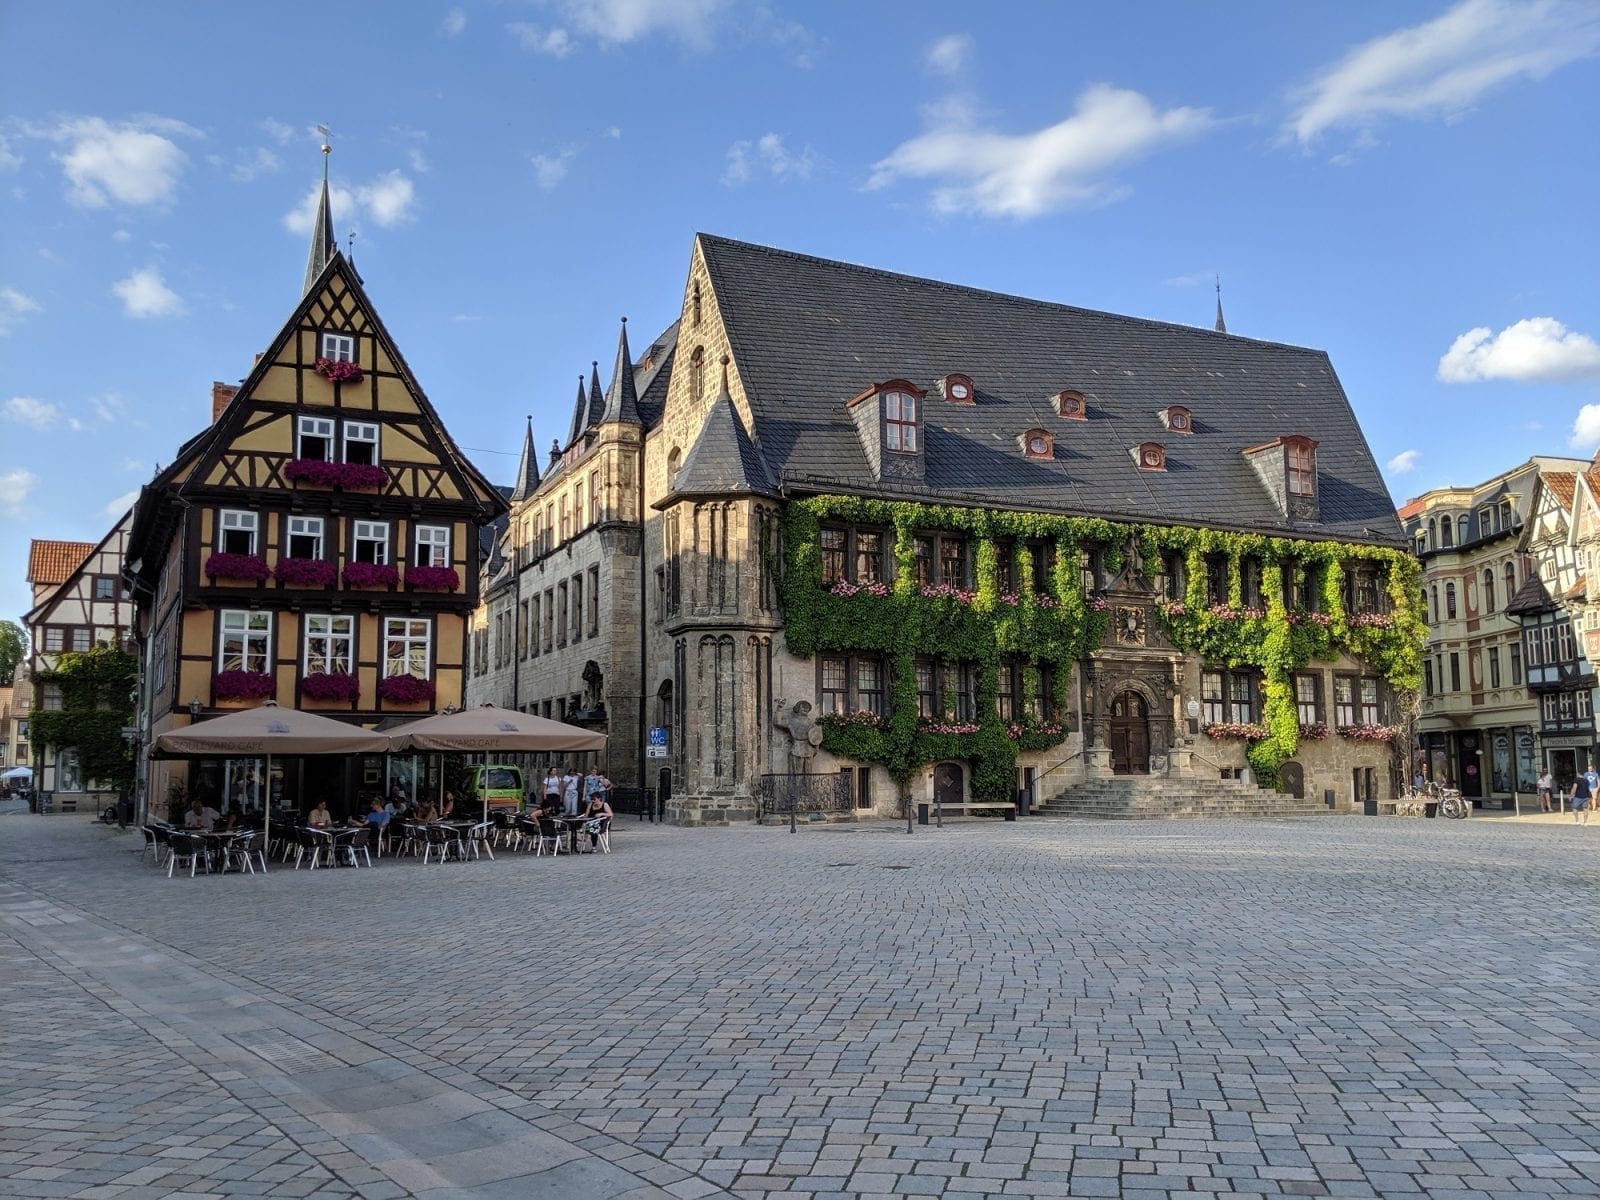 What to See in Quedlinburg- A Step Back in Time